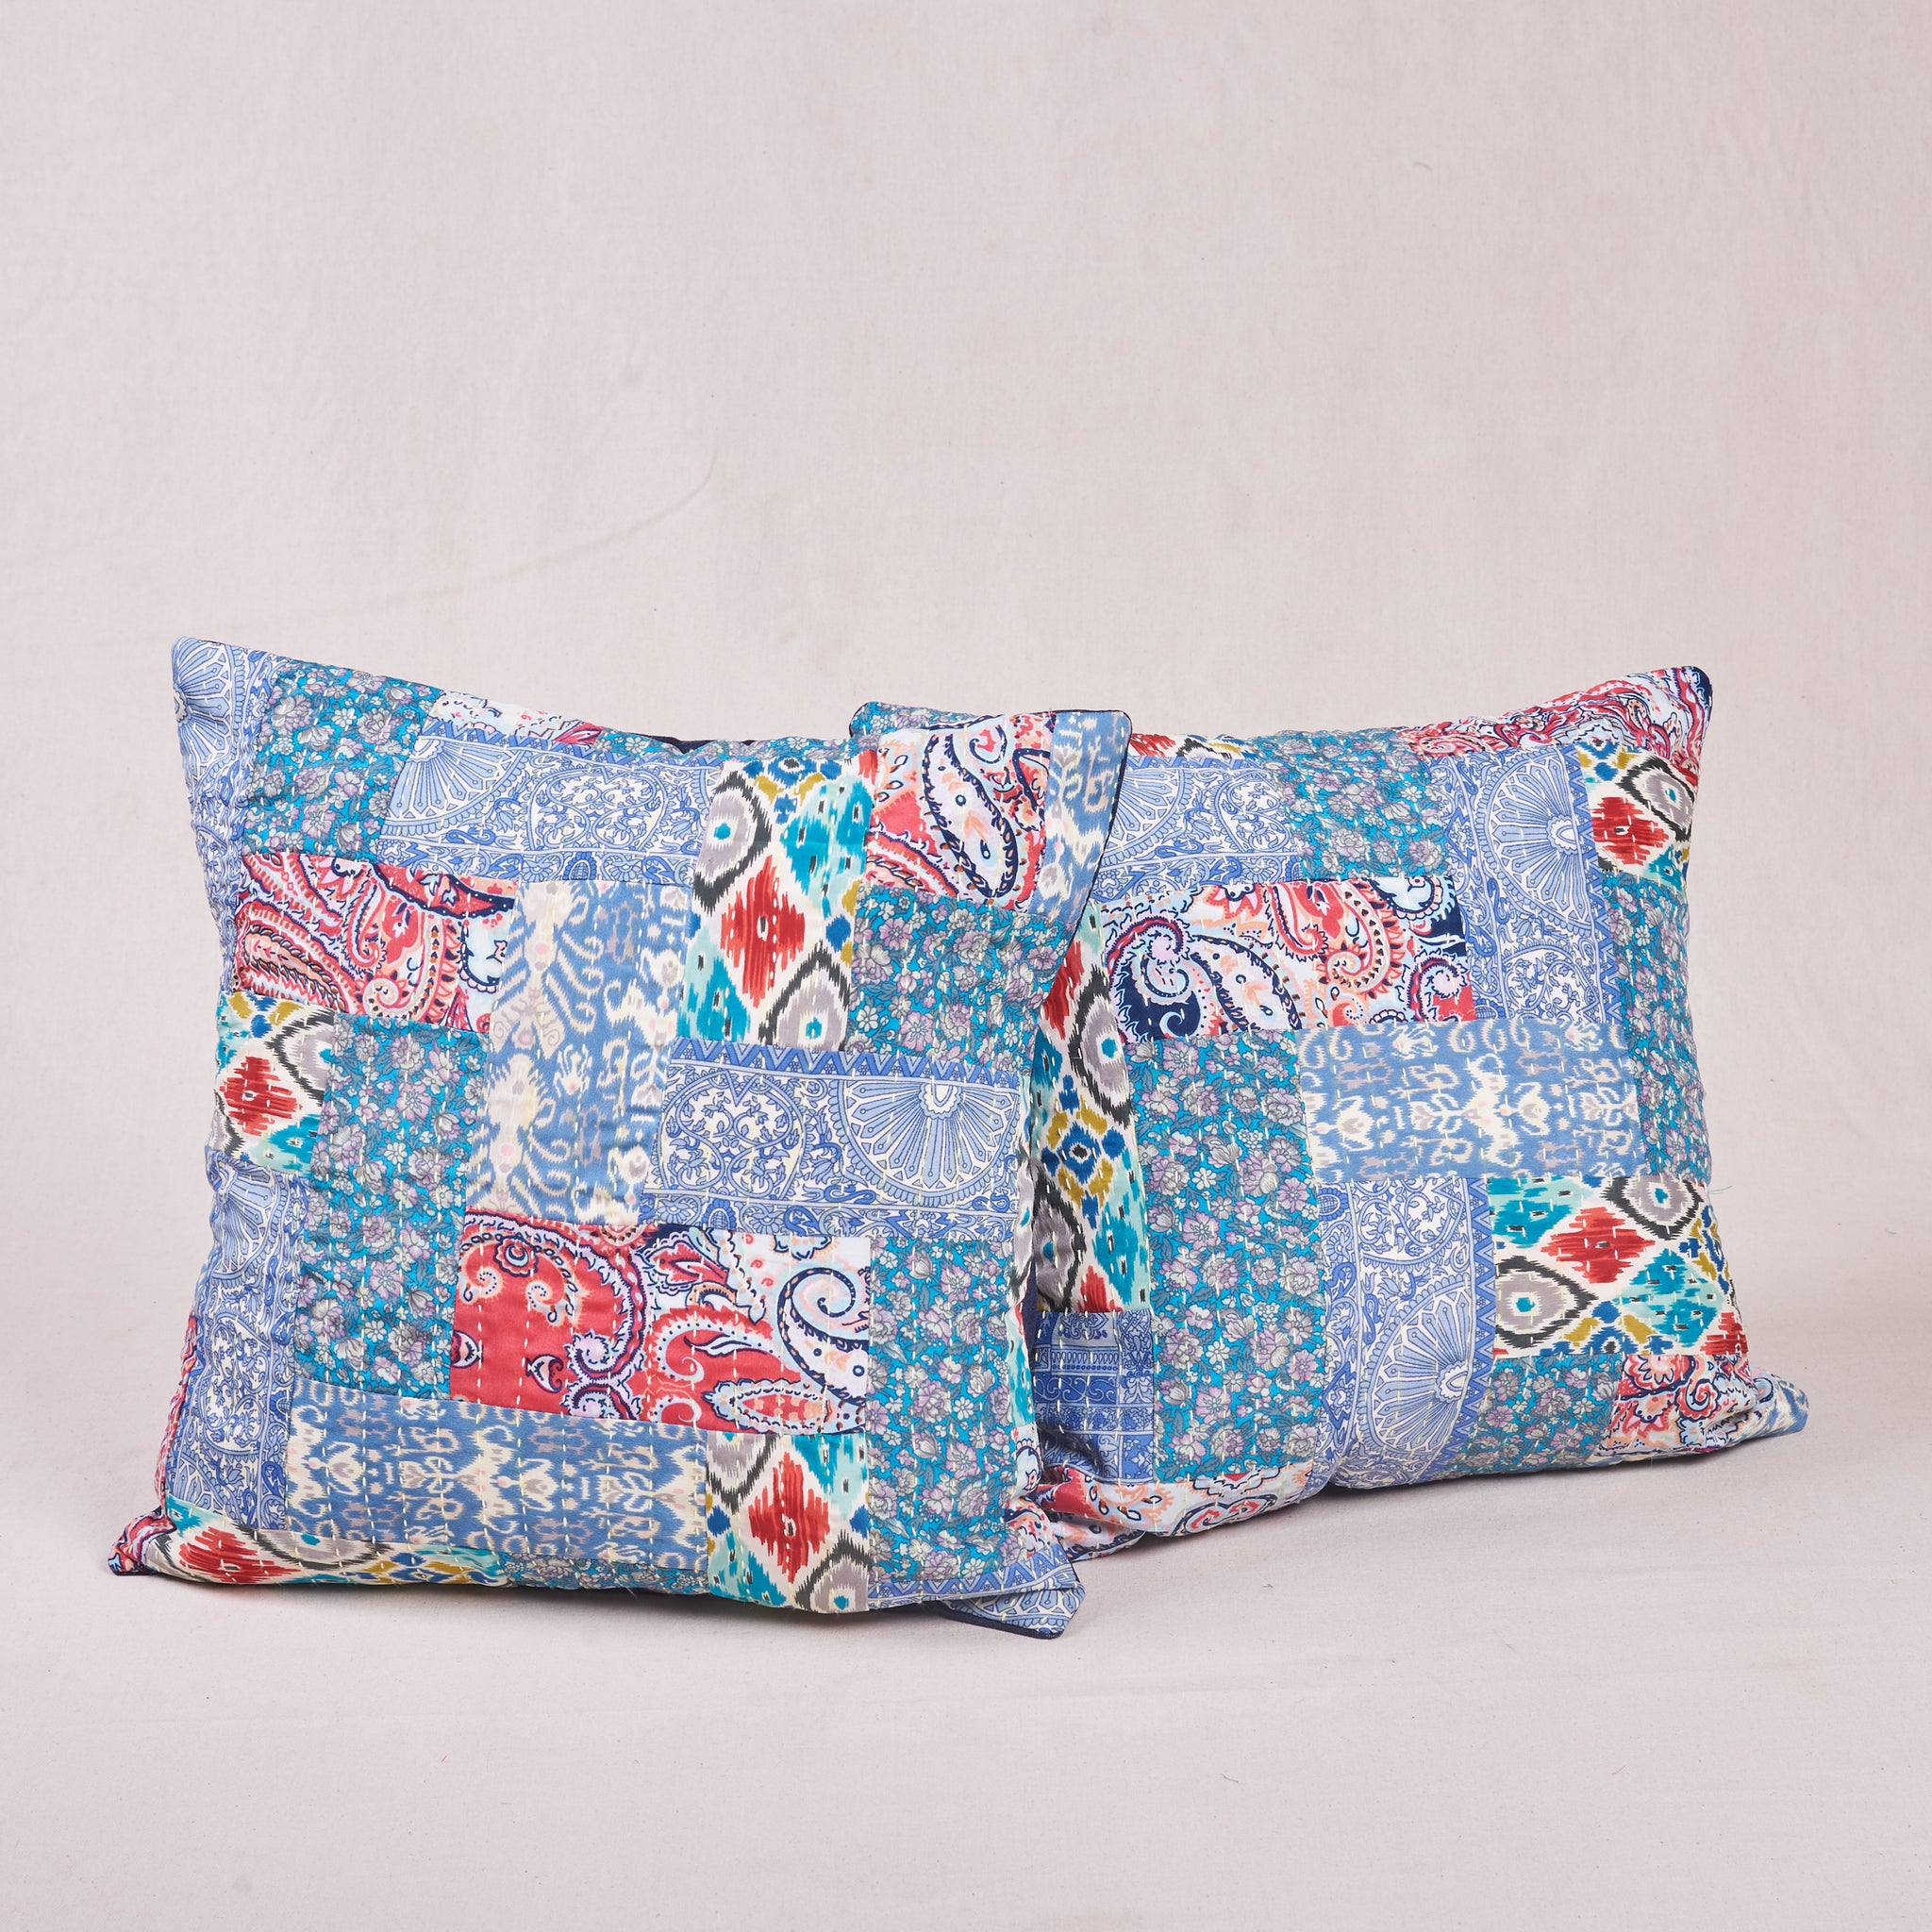 Cushion Cover - Patchwork Blue